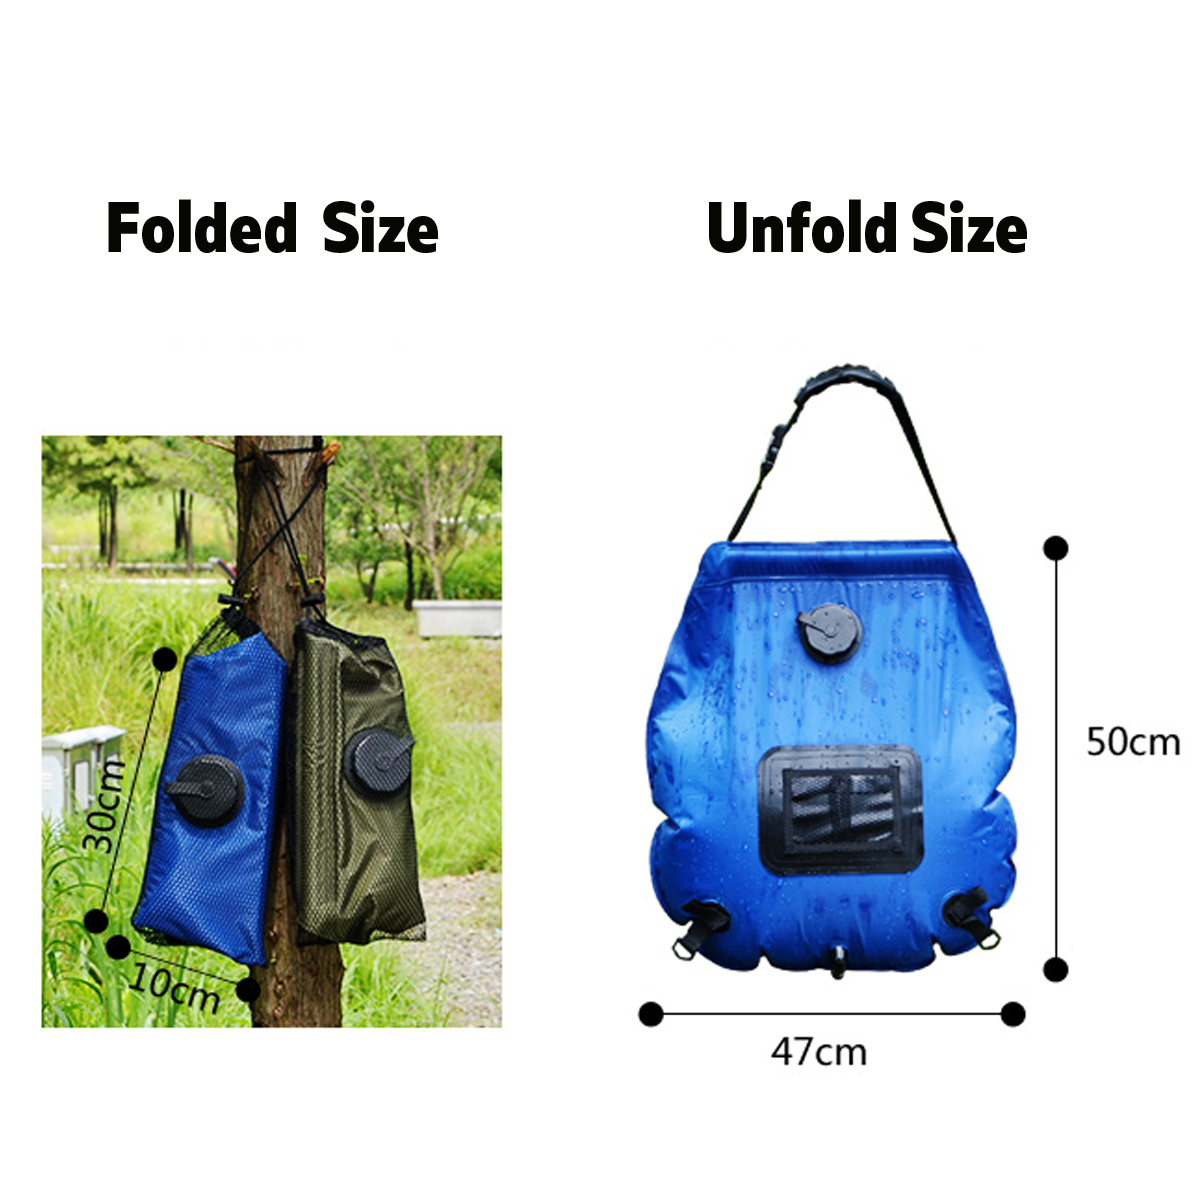 20L-Foldable-Portable-Water-Shower-Bathing-Bag-Solar-Energy-Heated-PVC-Outdoor-Travel-Camping-1724741-7